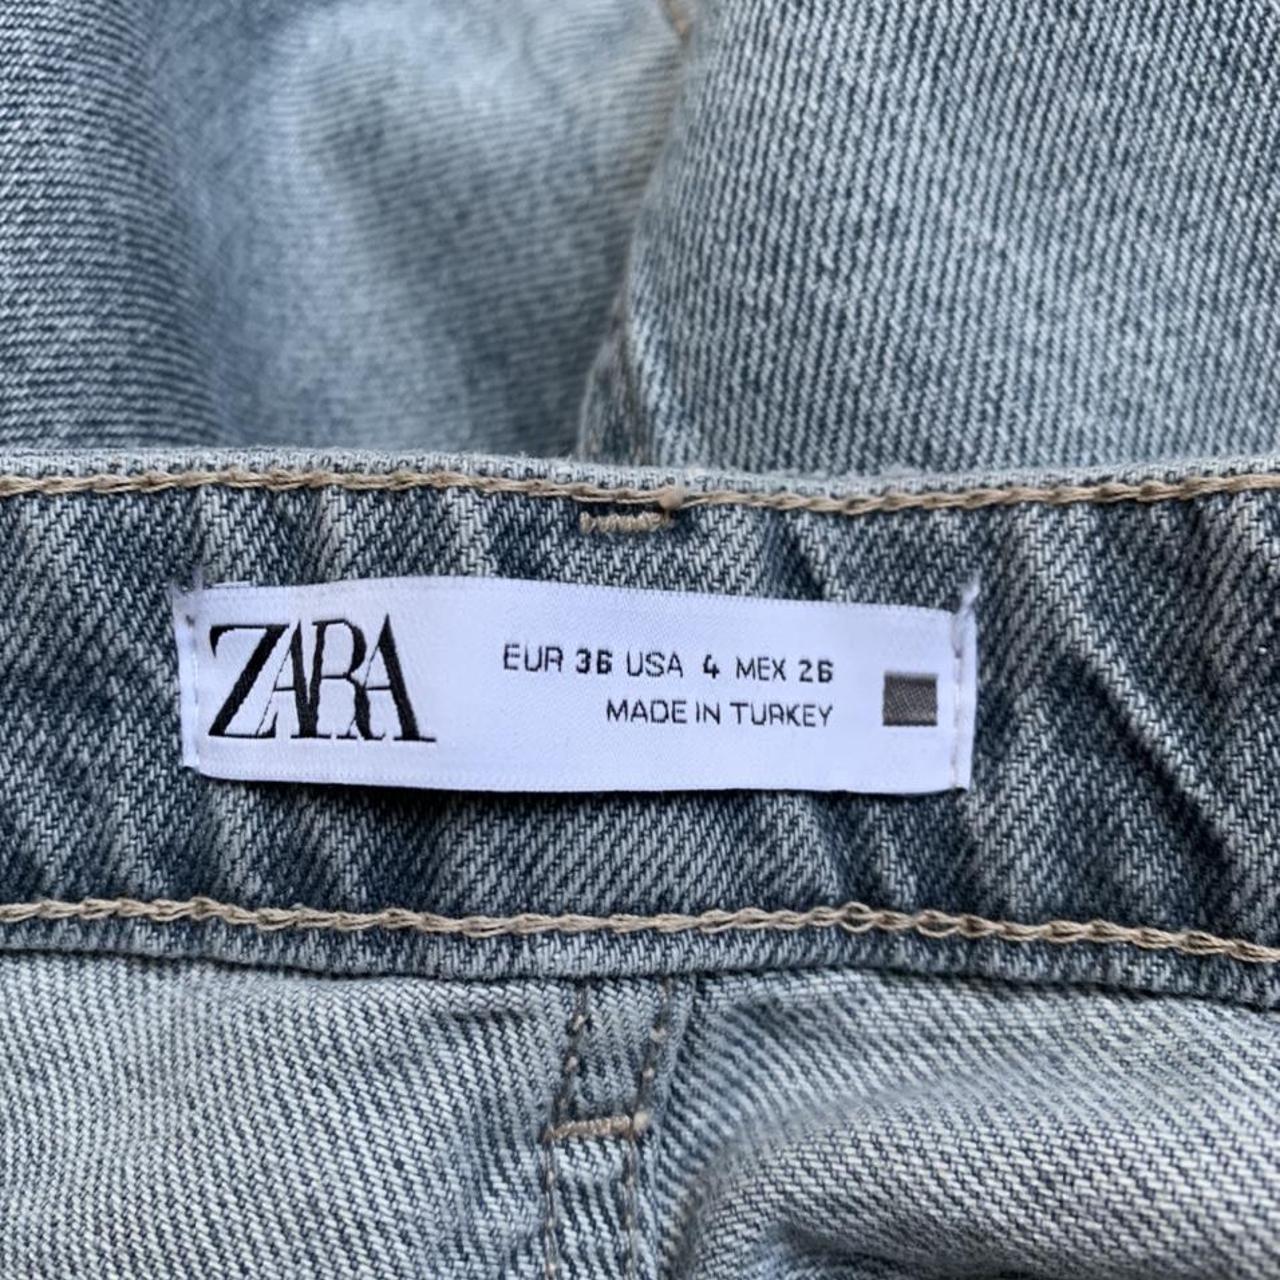 Product Image 2 - Brand new Zara jeans the